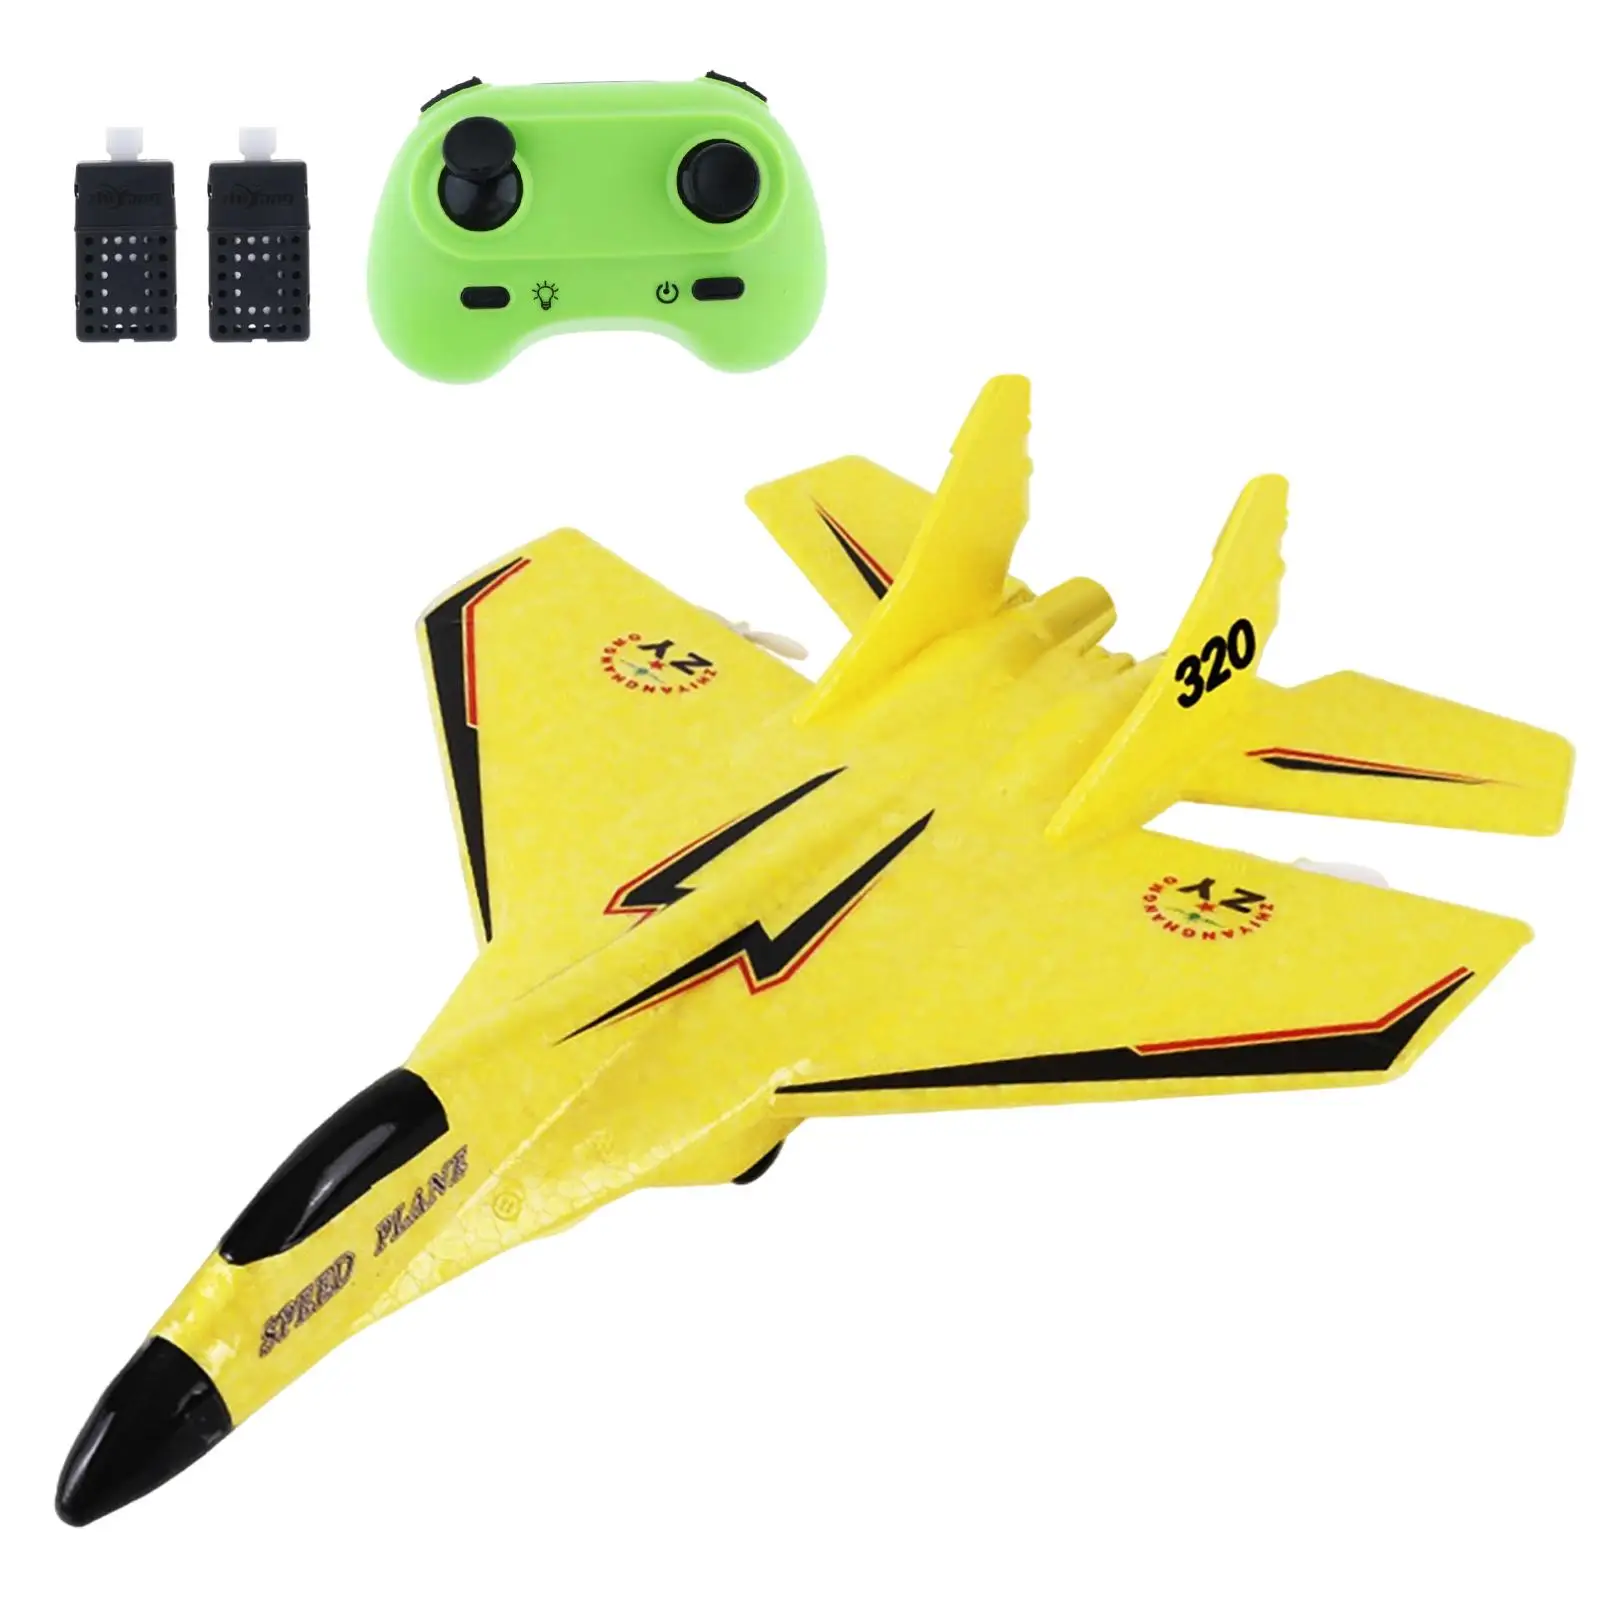 2 CH RC Plane Portable Easy to Control 2.4G Foam RC Airplane Hobby RC Glider RC Aircraft Jet for Beginner Kids Adults Boys Girls